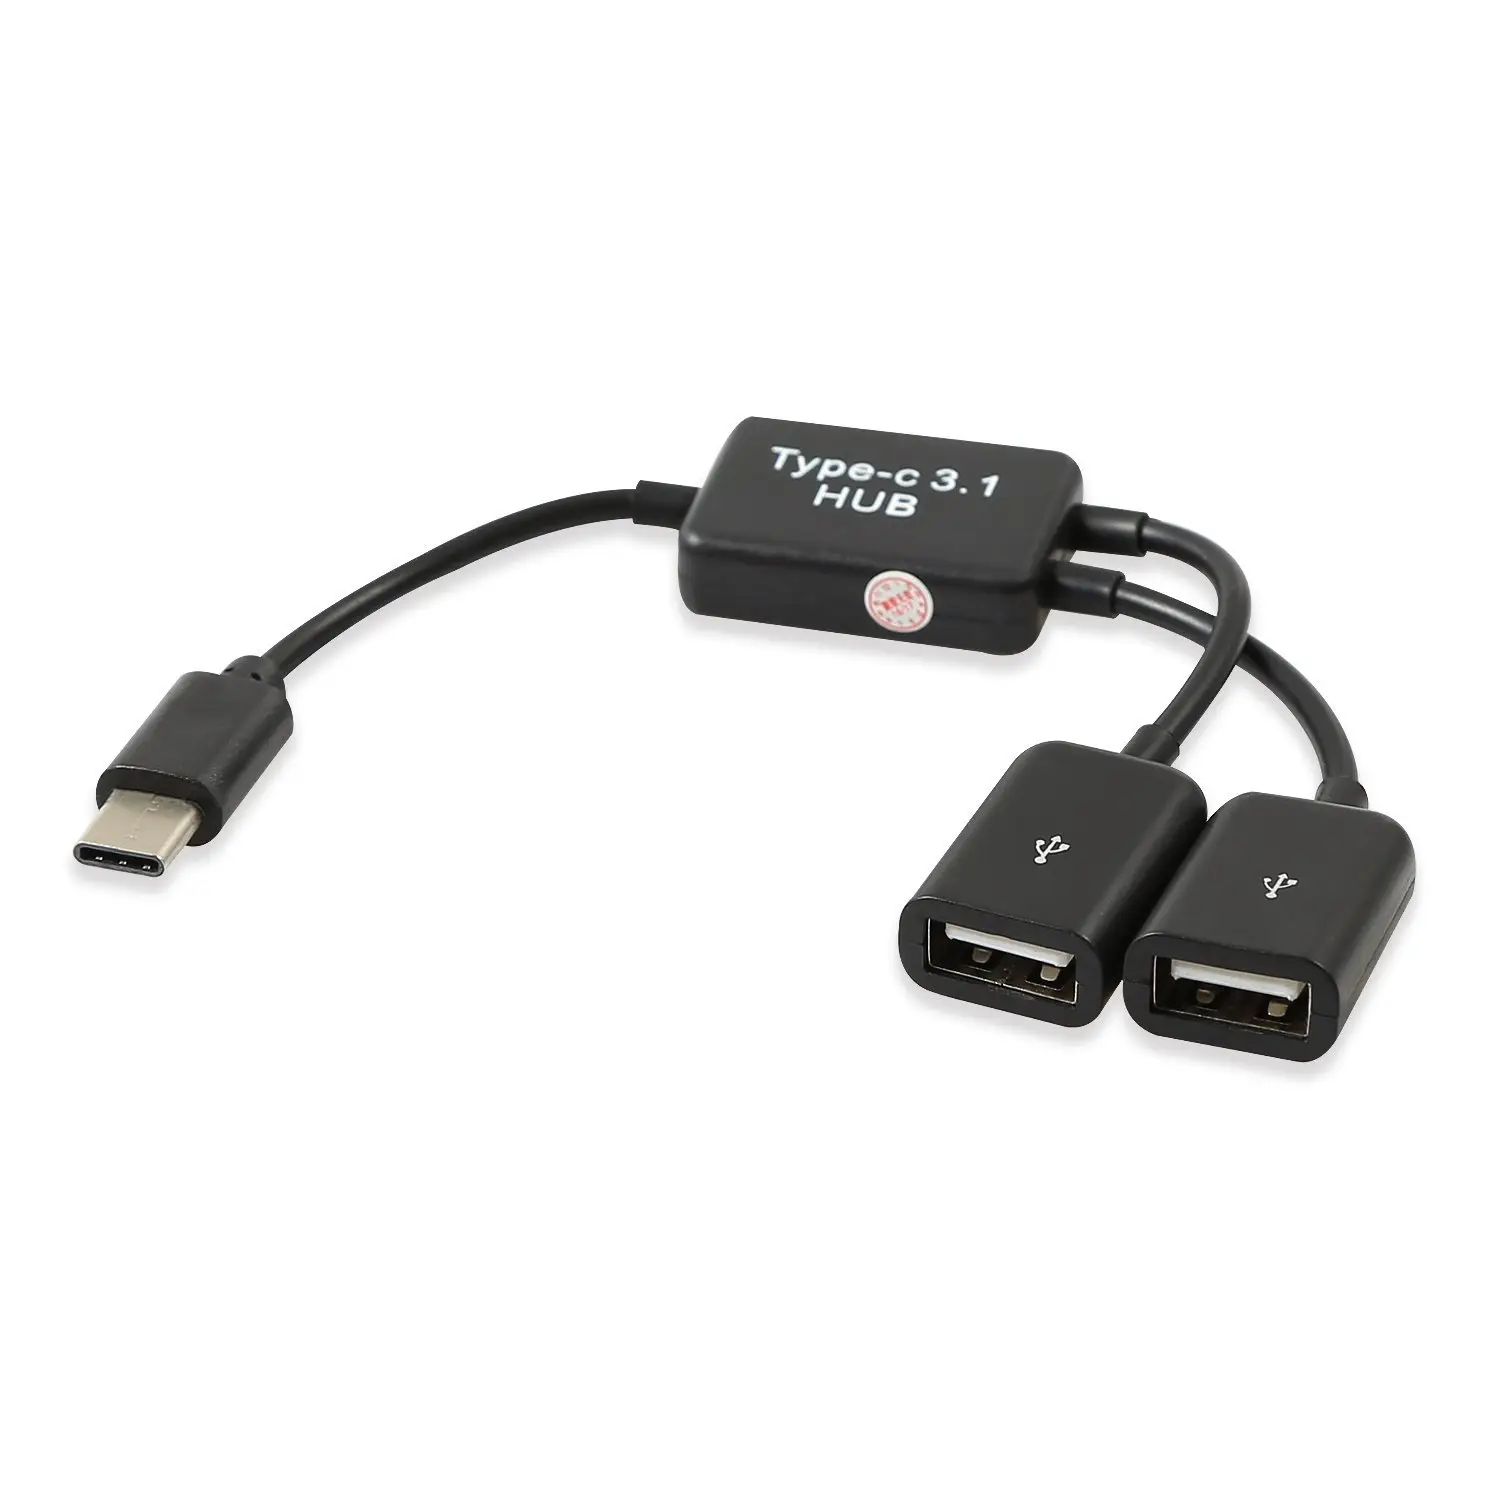 Type-c HUB with OTG USB 3.1 Male to Dual 2.0 Female cable 2 ports hub